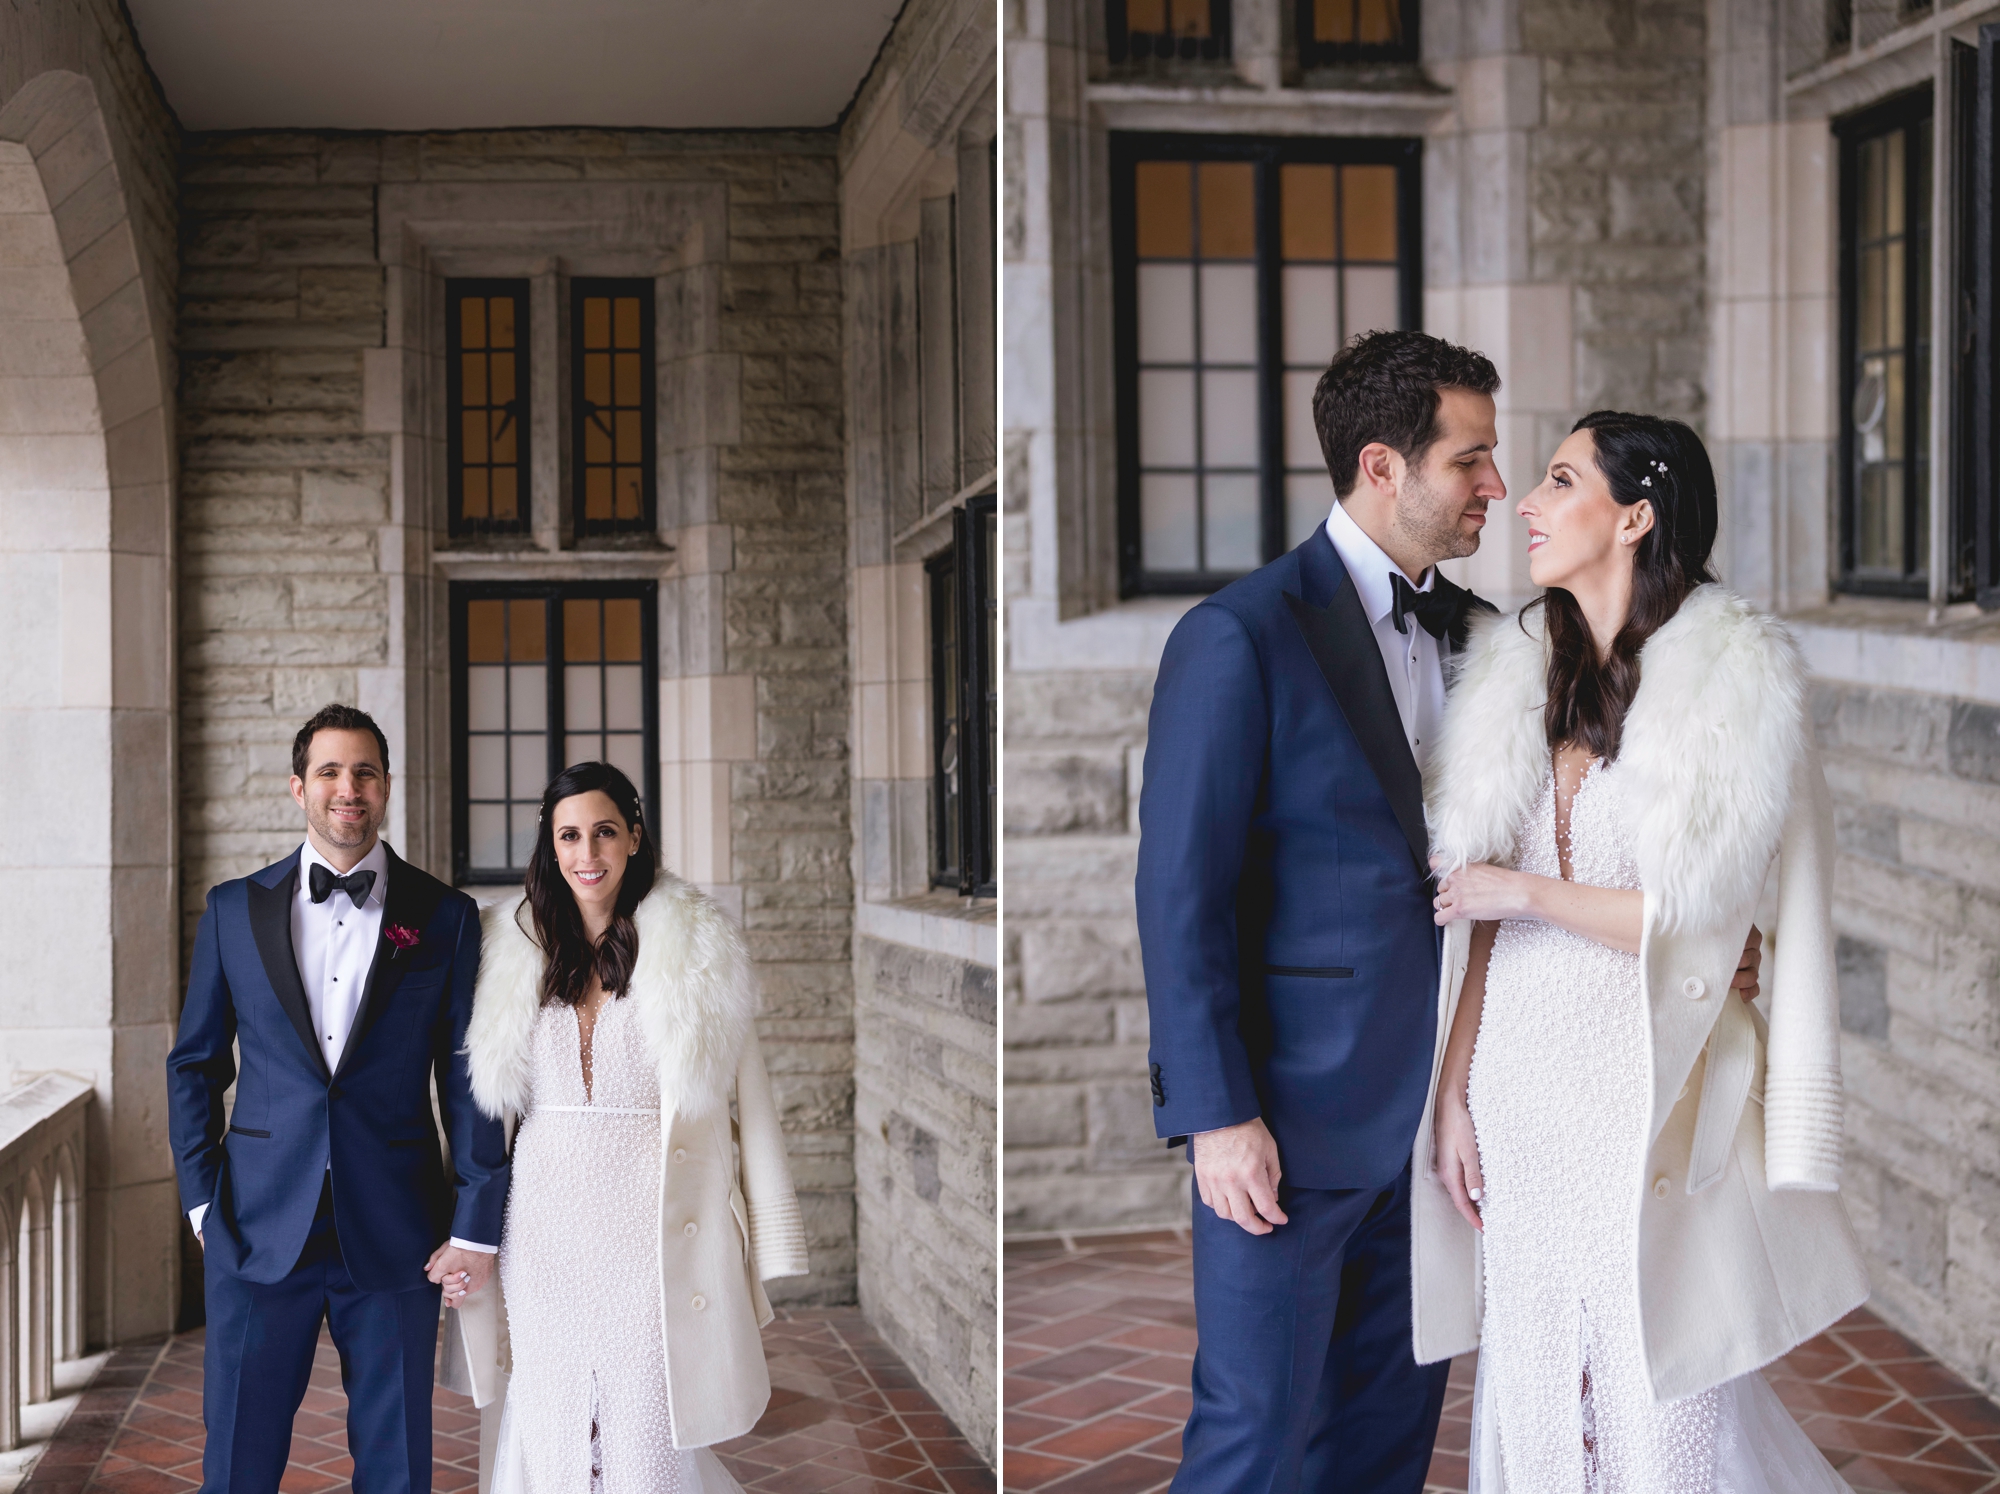 Outside portraits of the bride and groom at Casa Loma in Toronto